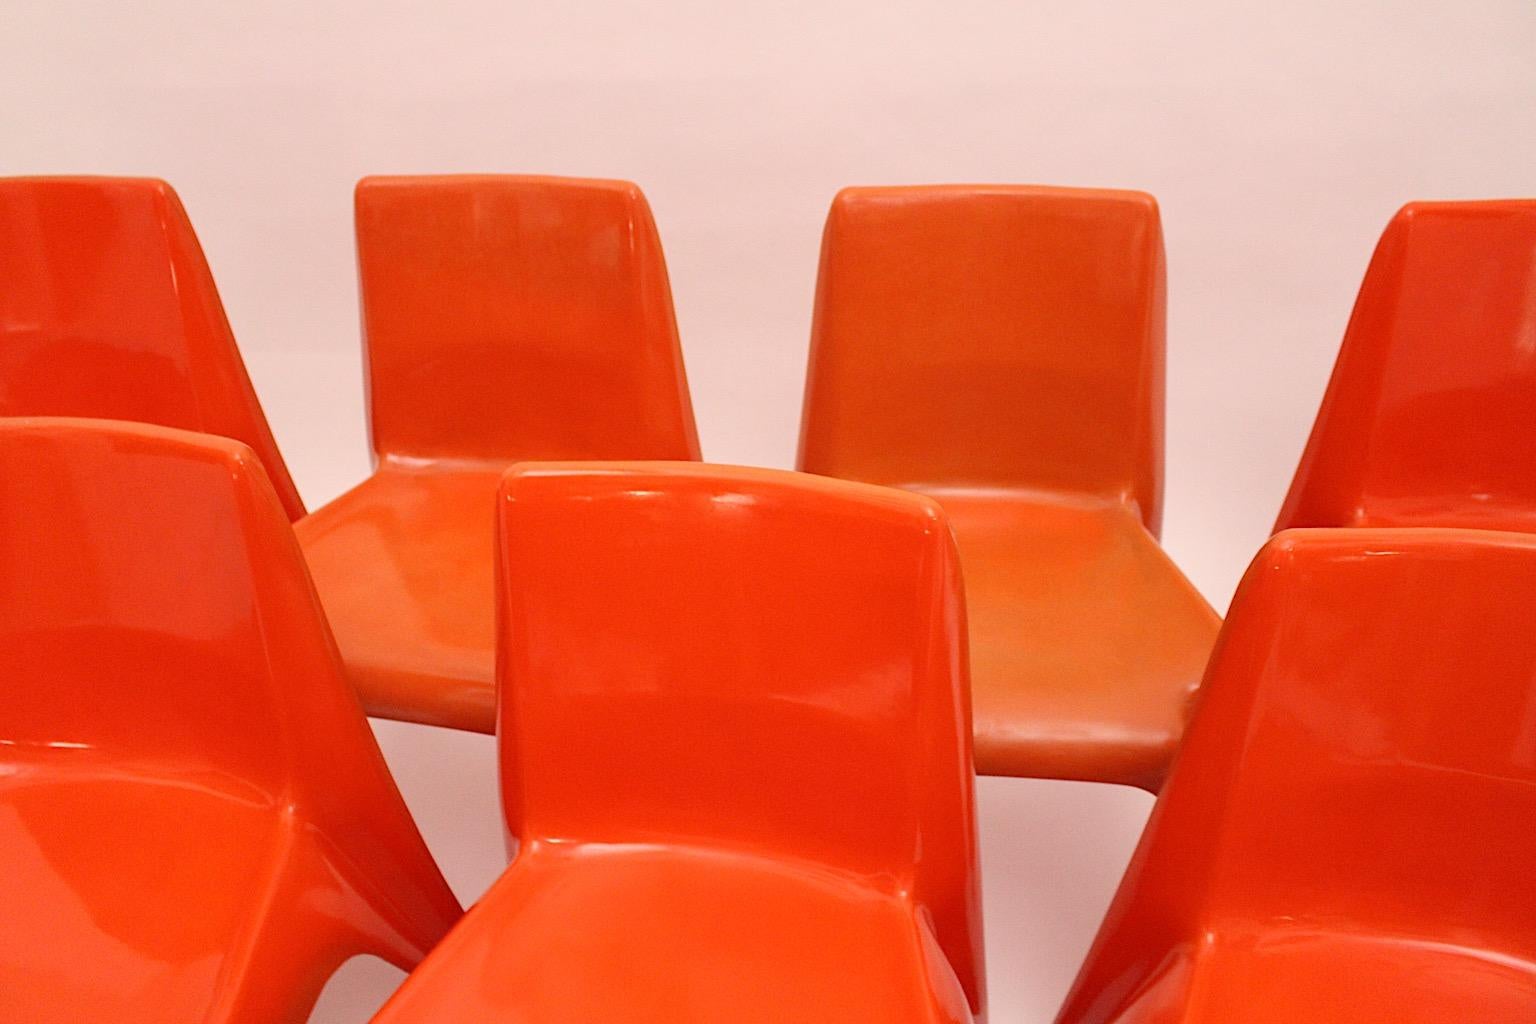 Space Age Vintage Ten Red Plastic Dining Chairs Helmut Baetzner Bofinger, 1964 For Sale 4